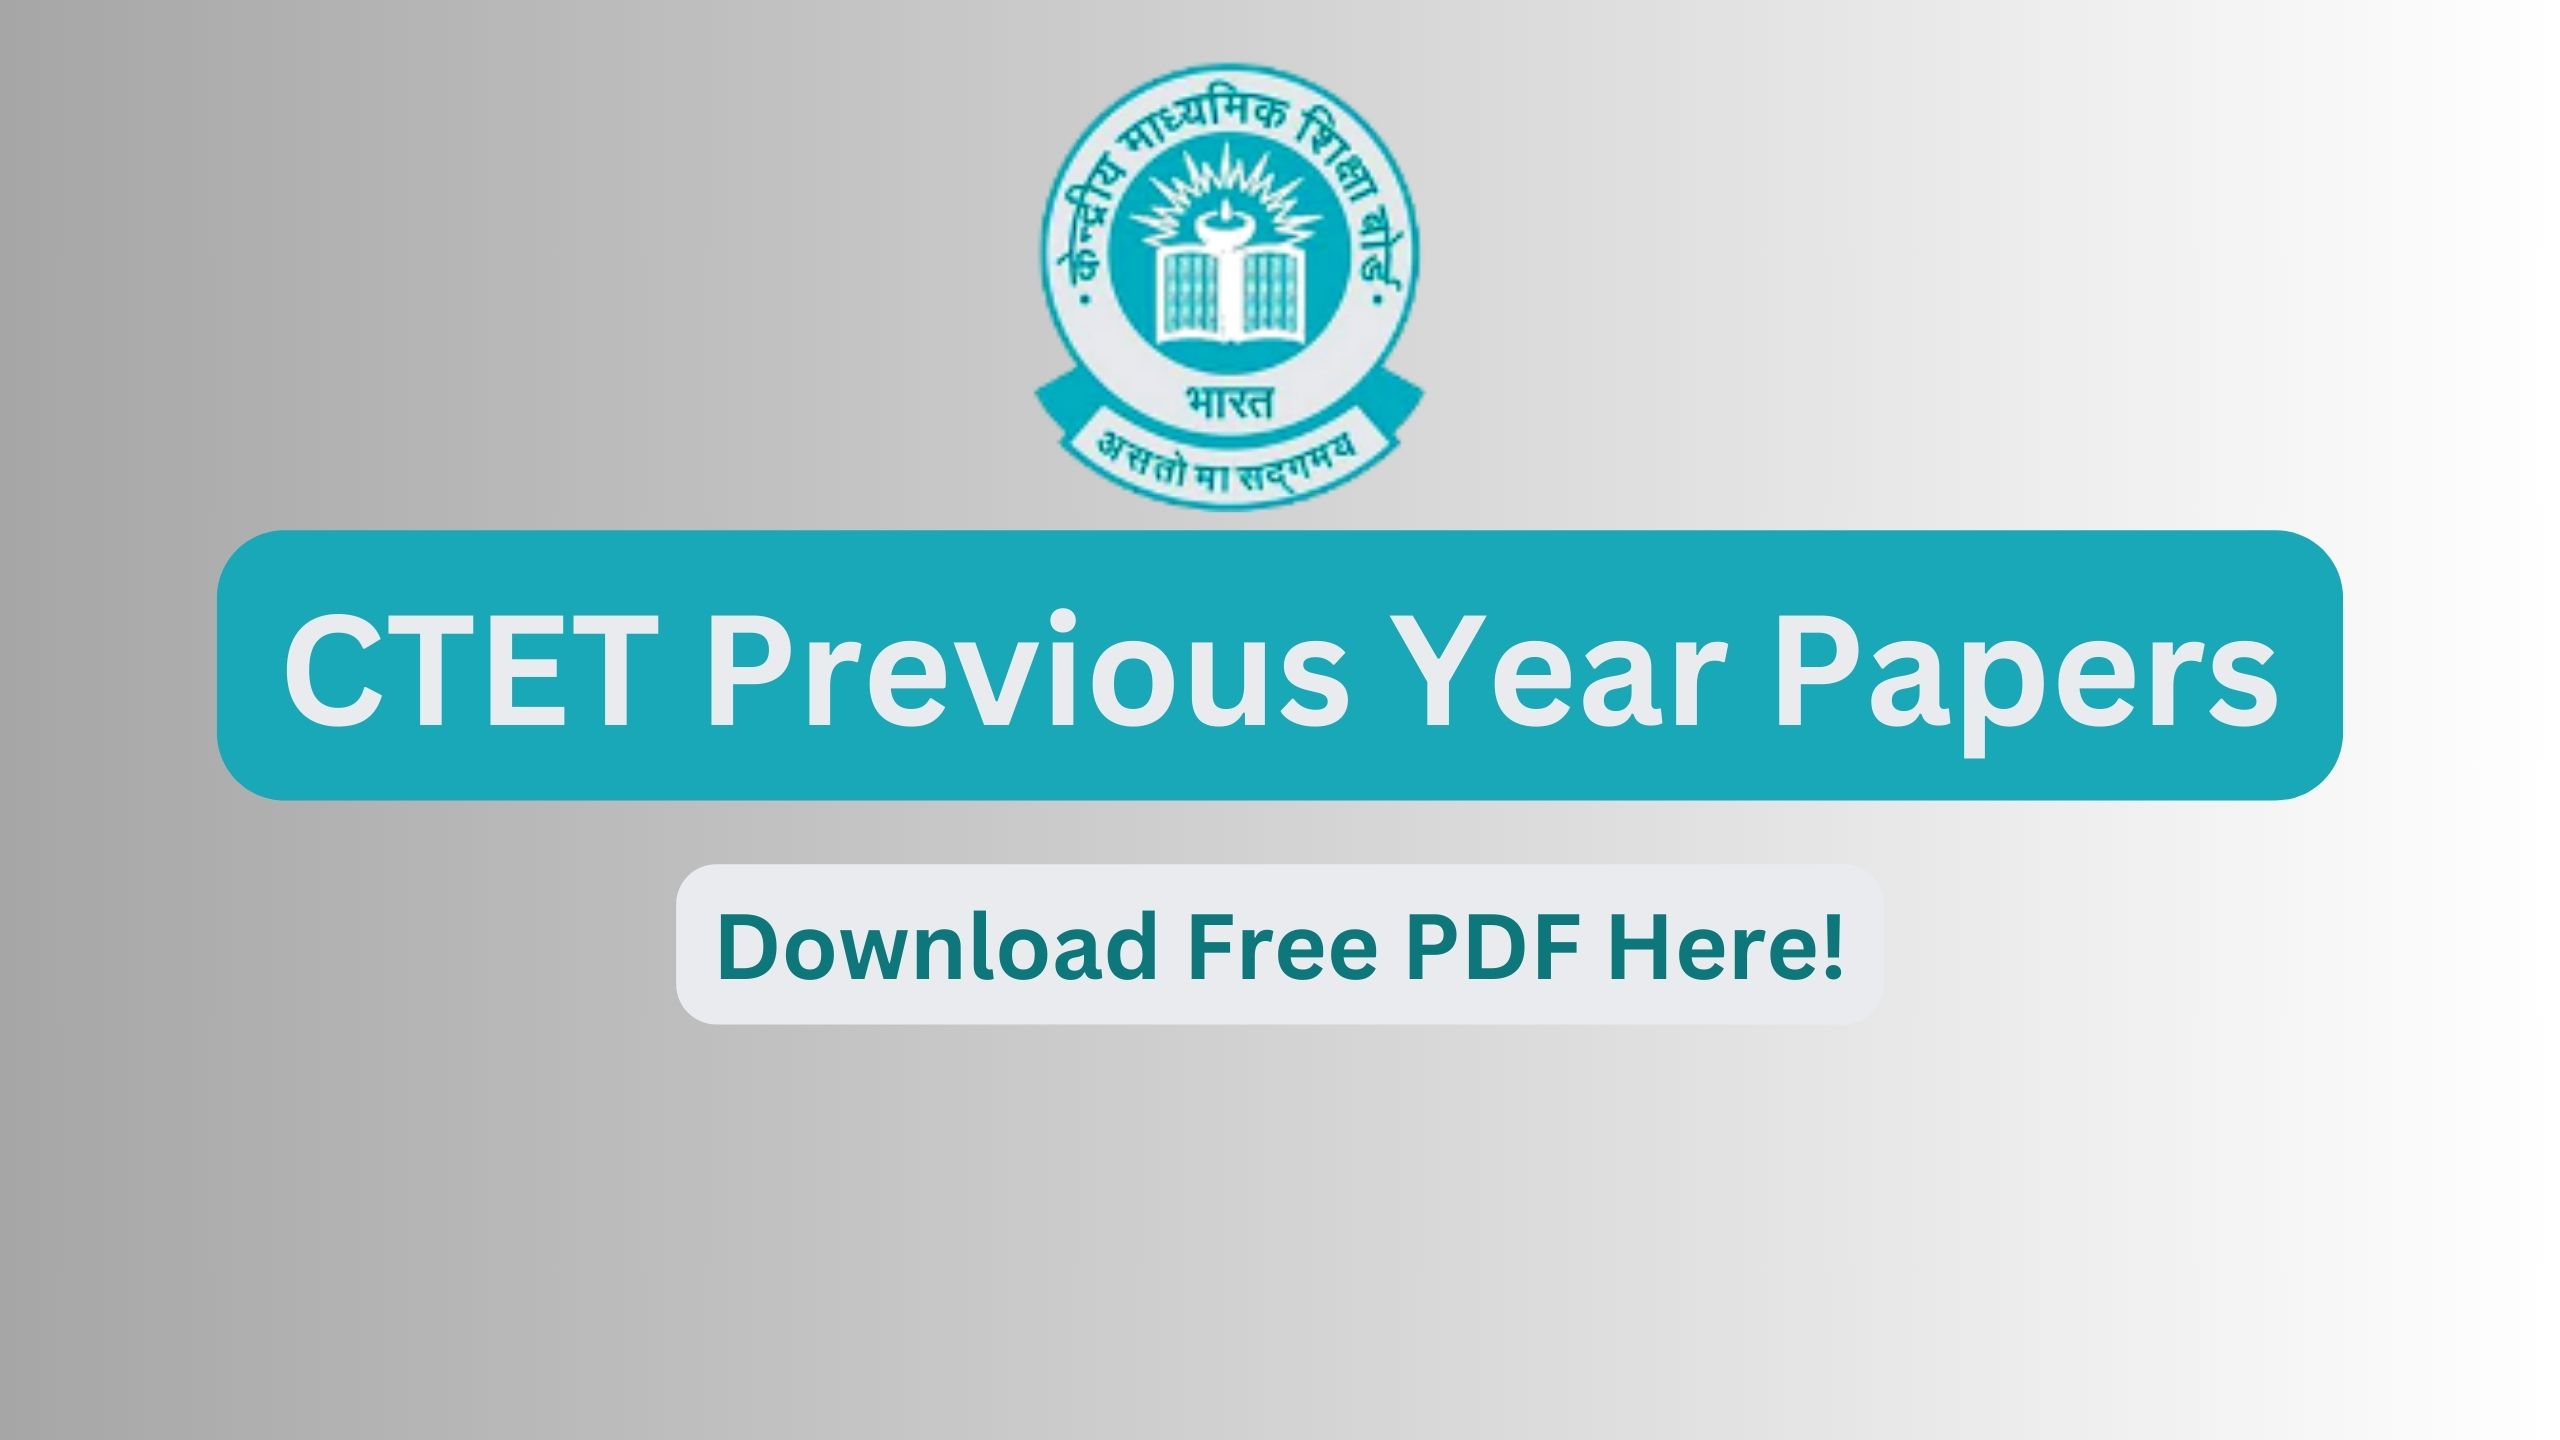 CTET Previous Year Papers